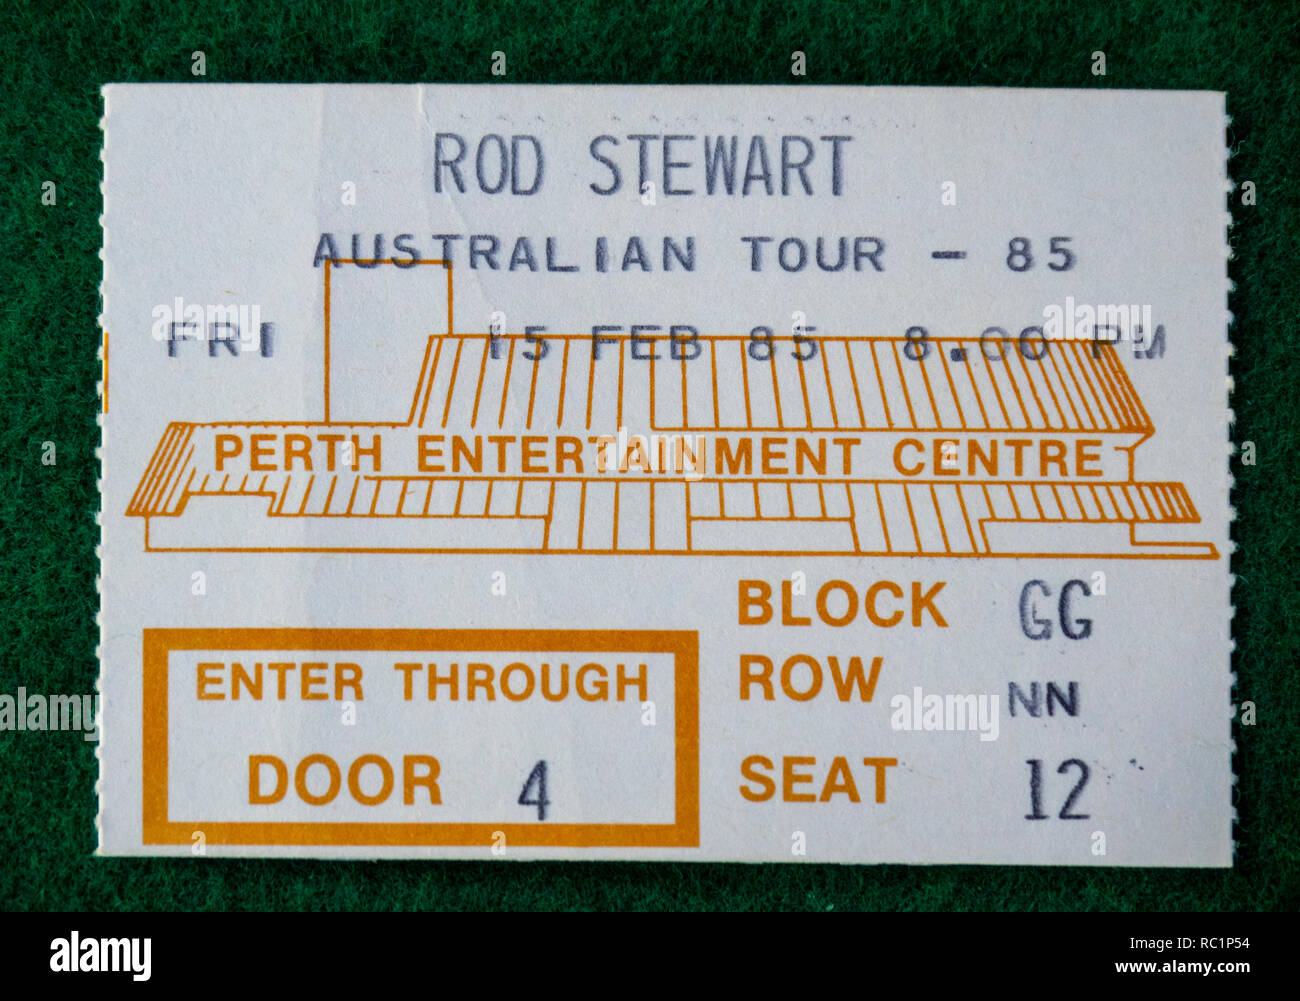 Ticket for Rod Stewart concert at Perth Entertainment Centre in 1985 WA Australia. Stock Photo